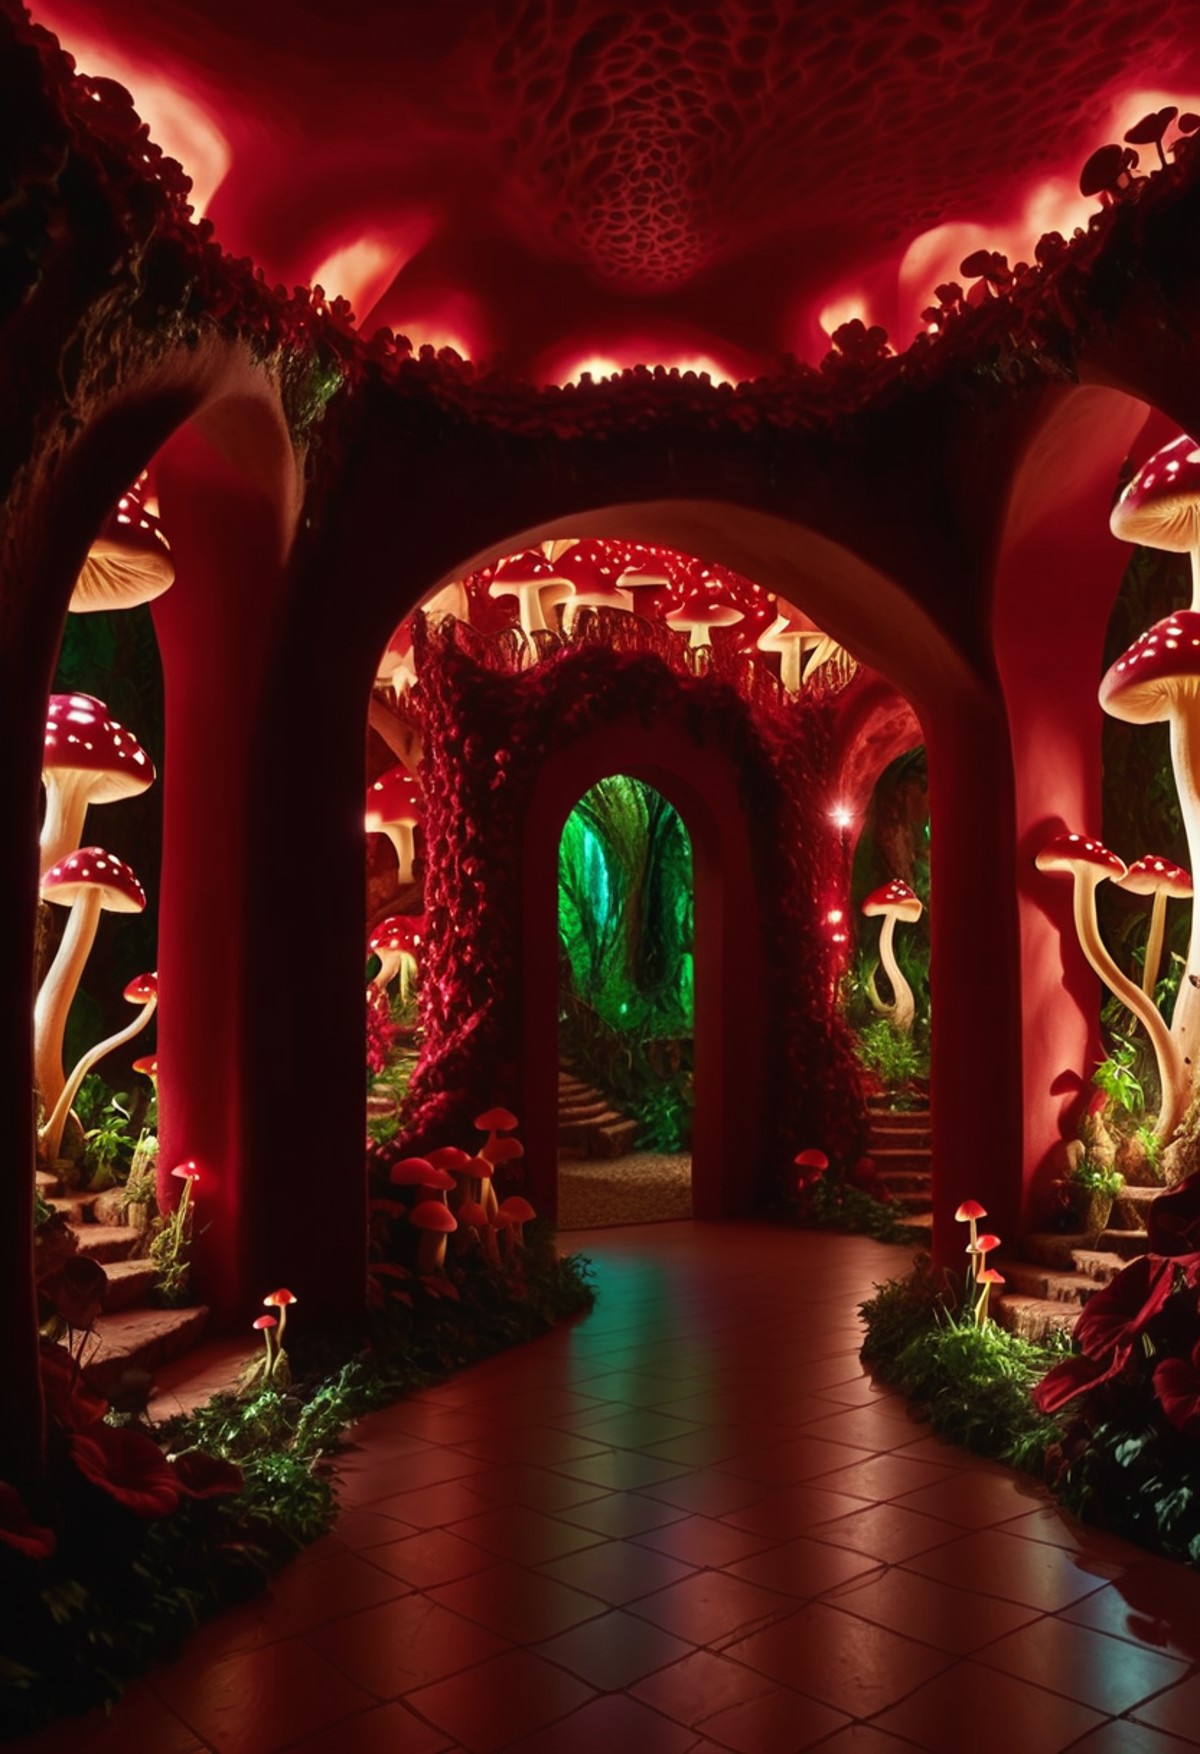 cinematic photo Inside a grand, ornate cave, a house made entirely of organic mushrooms and vines is depicted inside a mus...